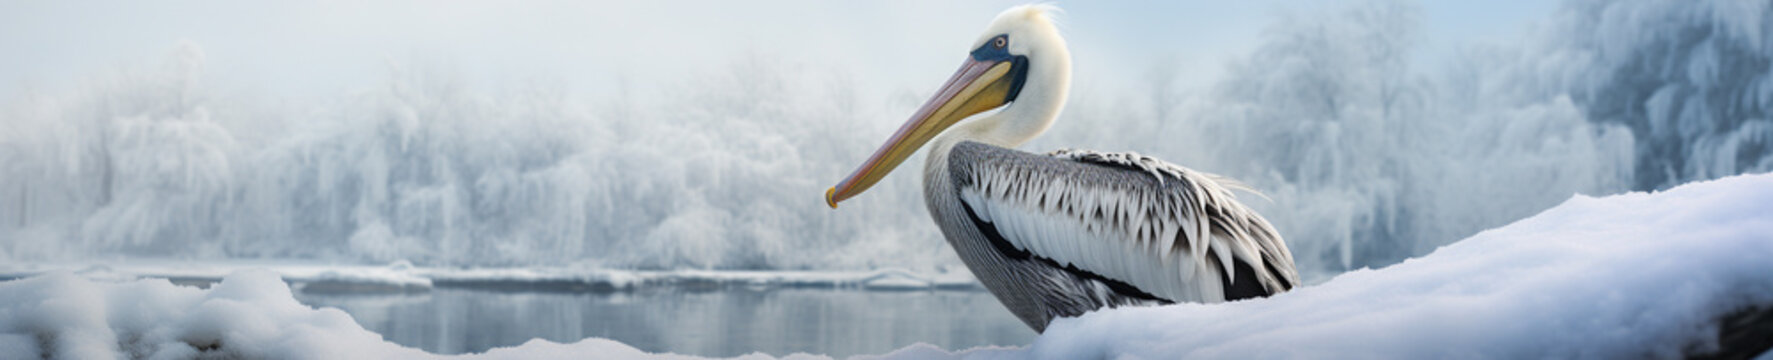 A Banner Photo of a Pelican in a Winter Setting